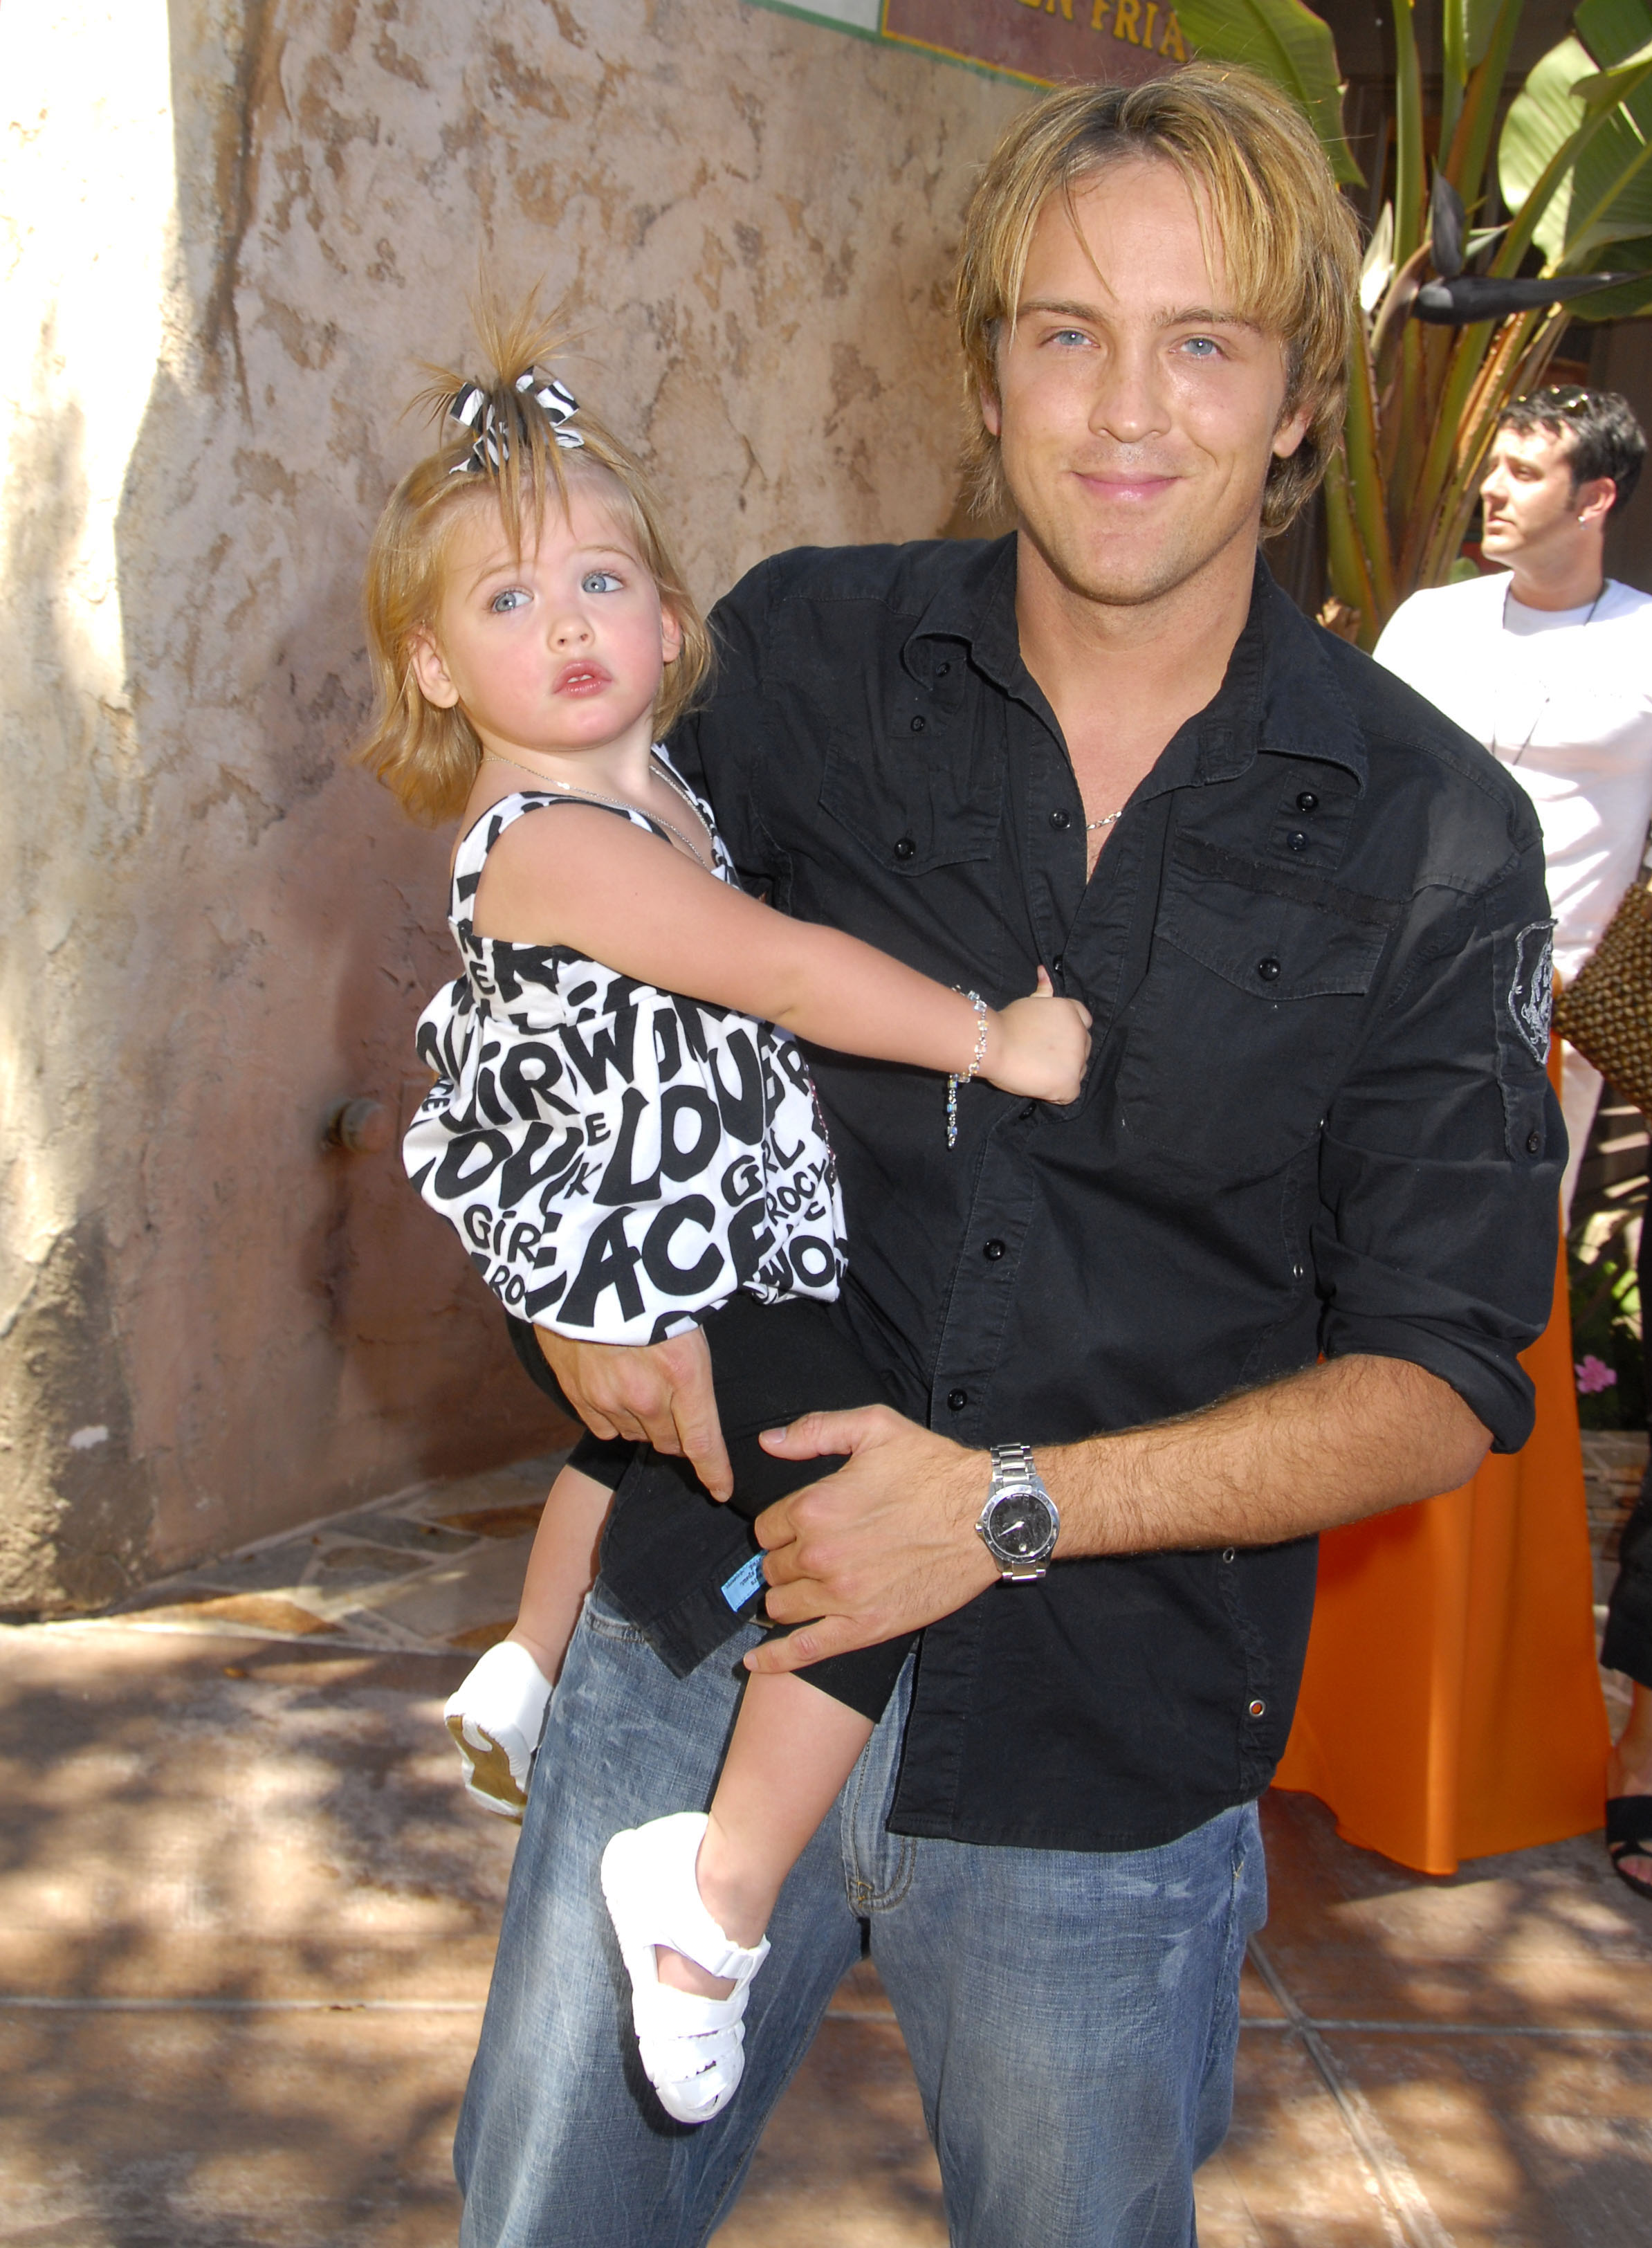 Dannielynn Smith and Larry Birkhead in California in 2008 | Source: Getty Images